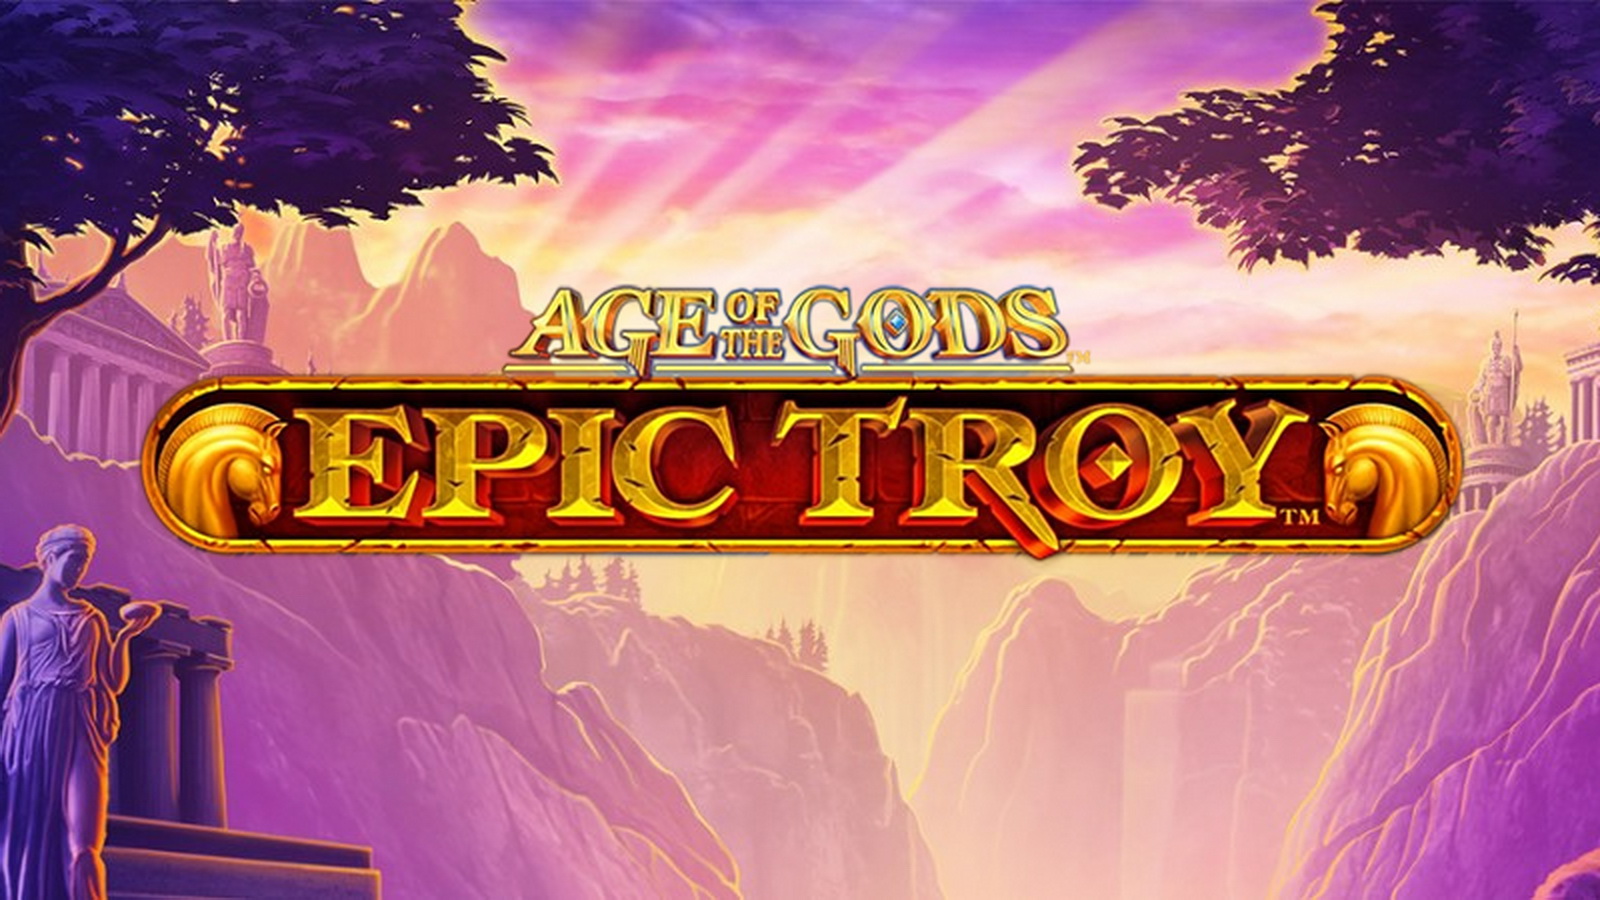 The Age of the Gods Epic Troy Online Slot Demo Game by Playtech